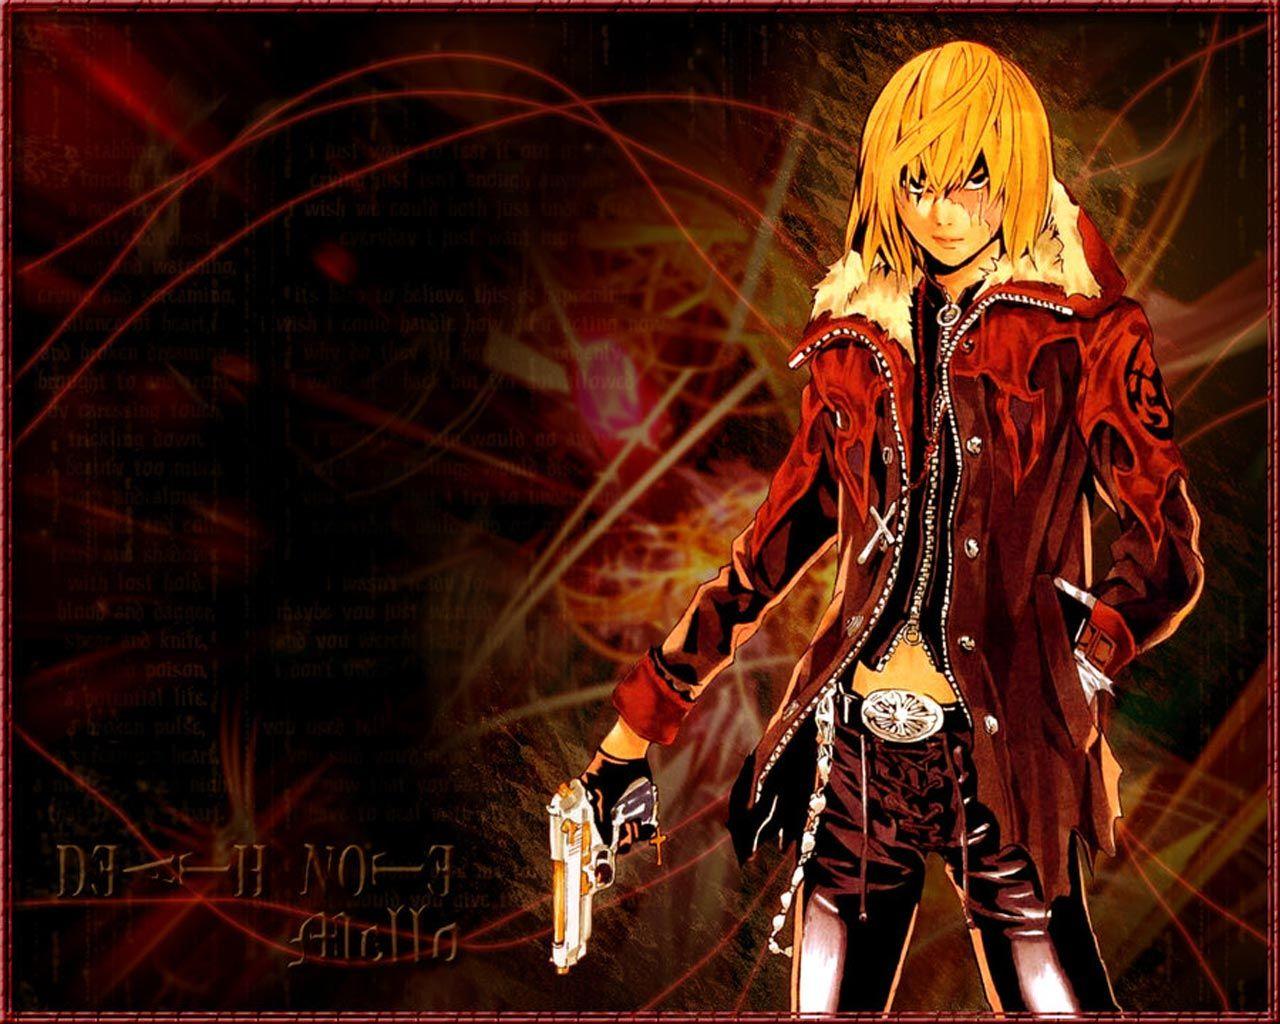 Mello Death Note Wallpapers Wallpaper Cave